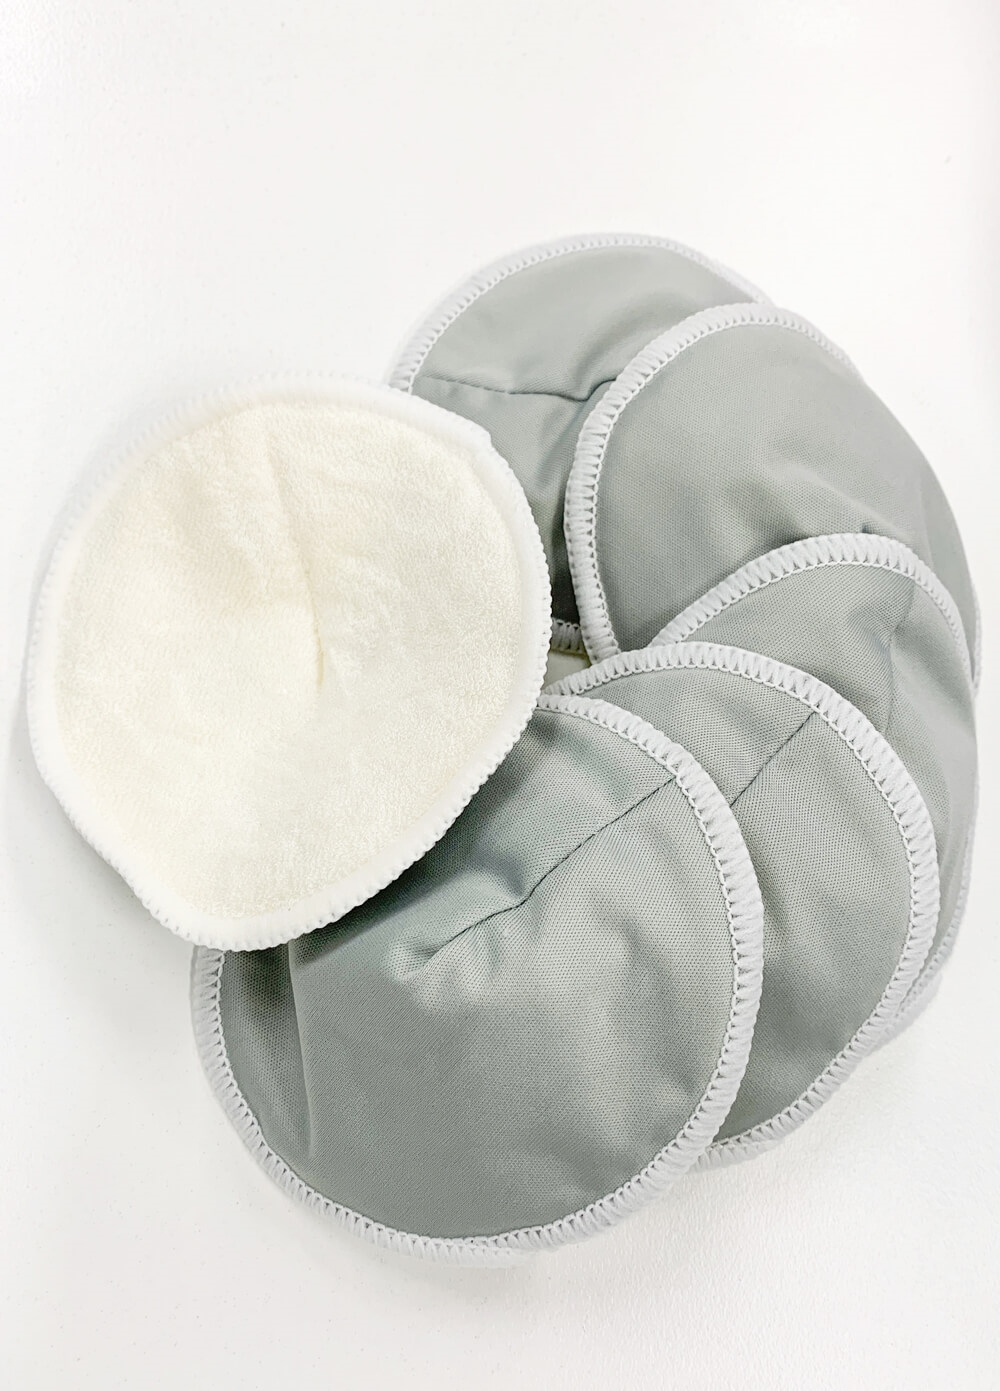 Contoured Resuable Bamboo Nursing Pads (3 Pairs) in Charcoal